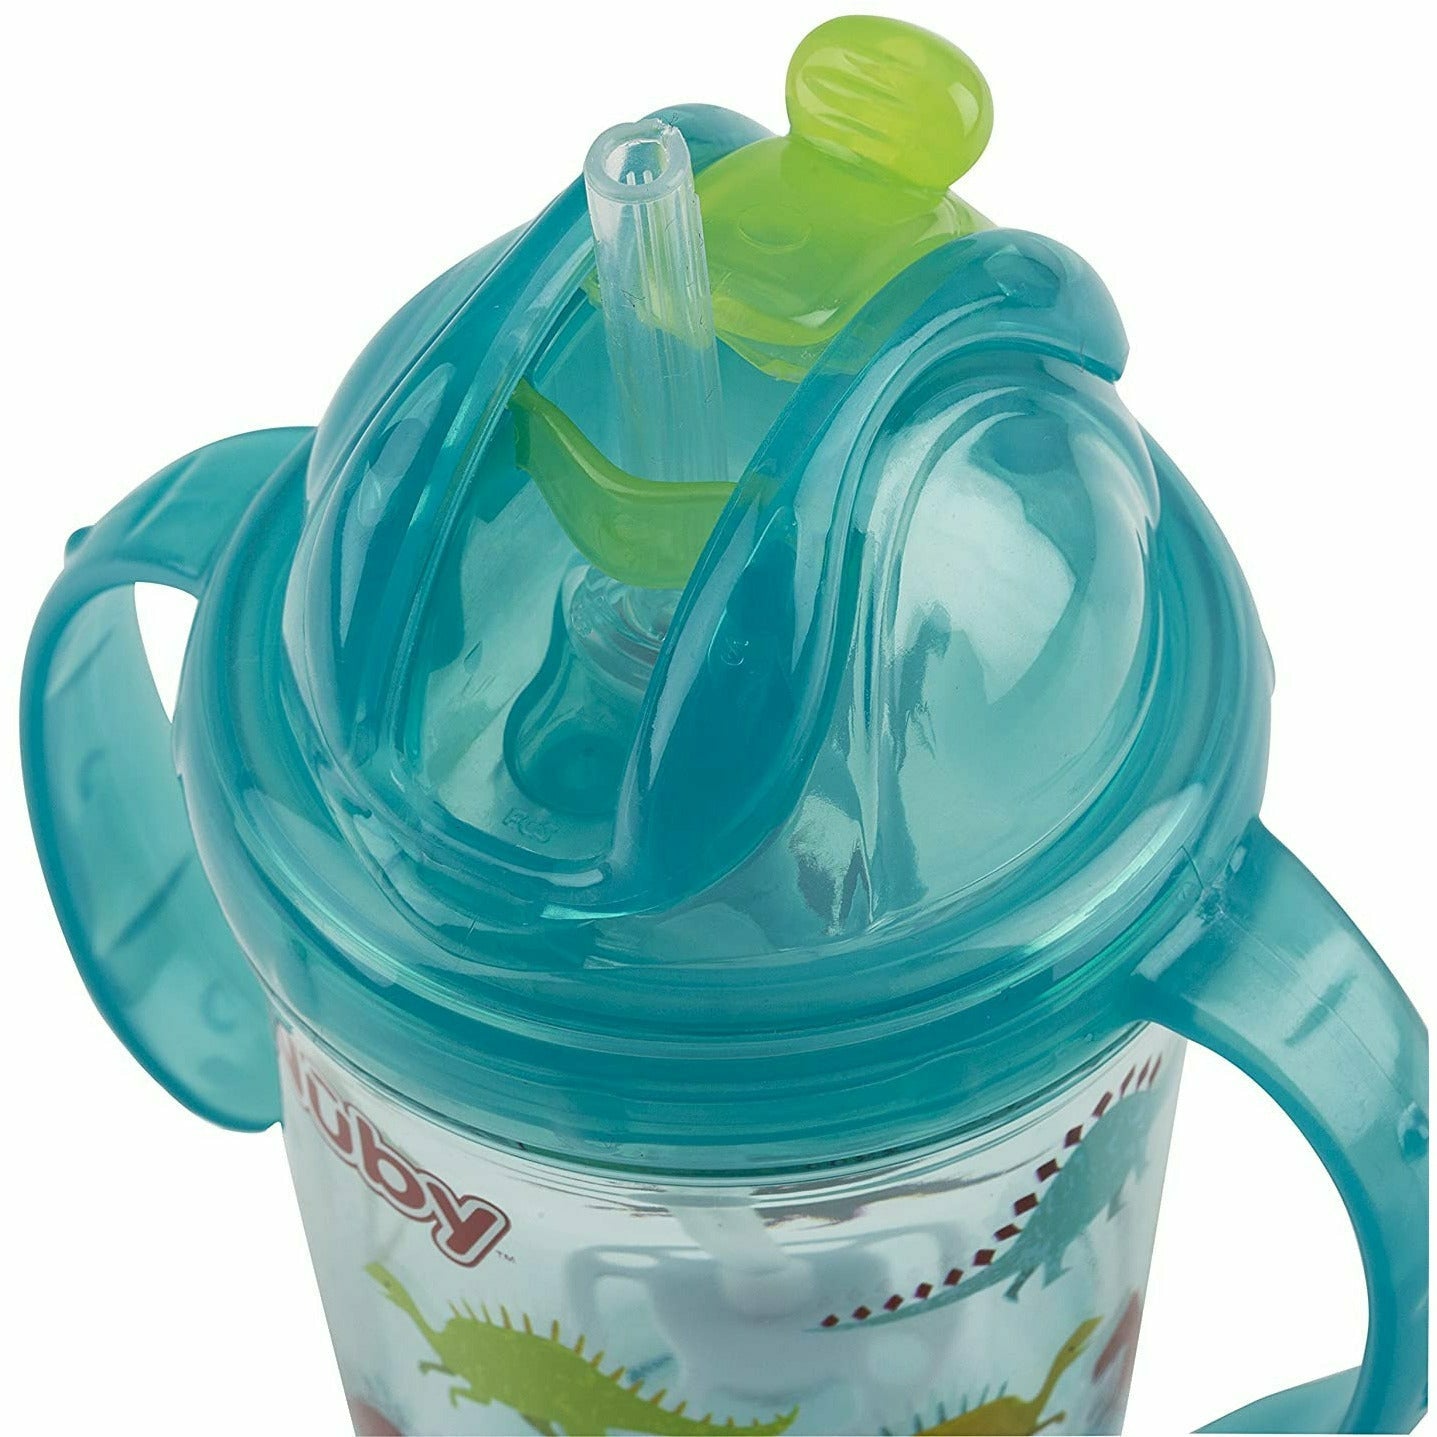 Nuby Baby Flip-It Up Freestyle Hard Straw Cup – Good's Store Online